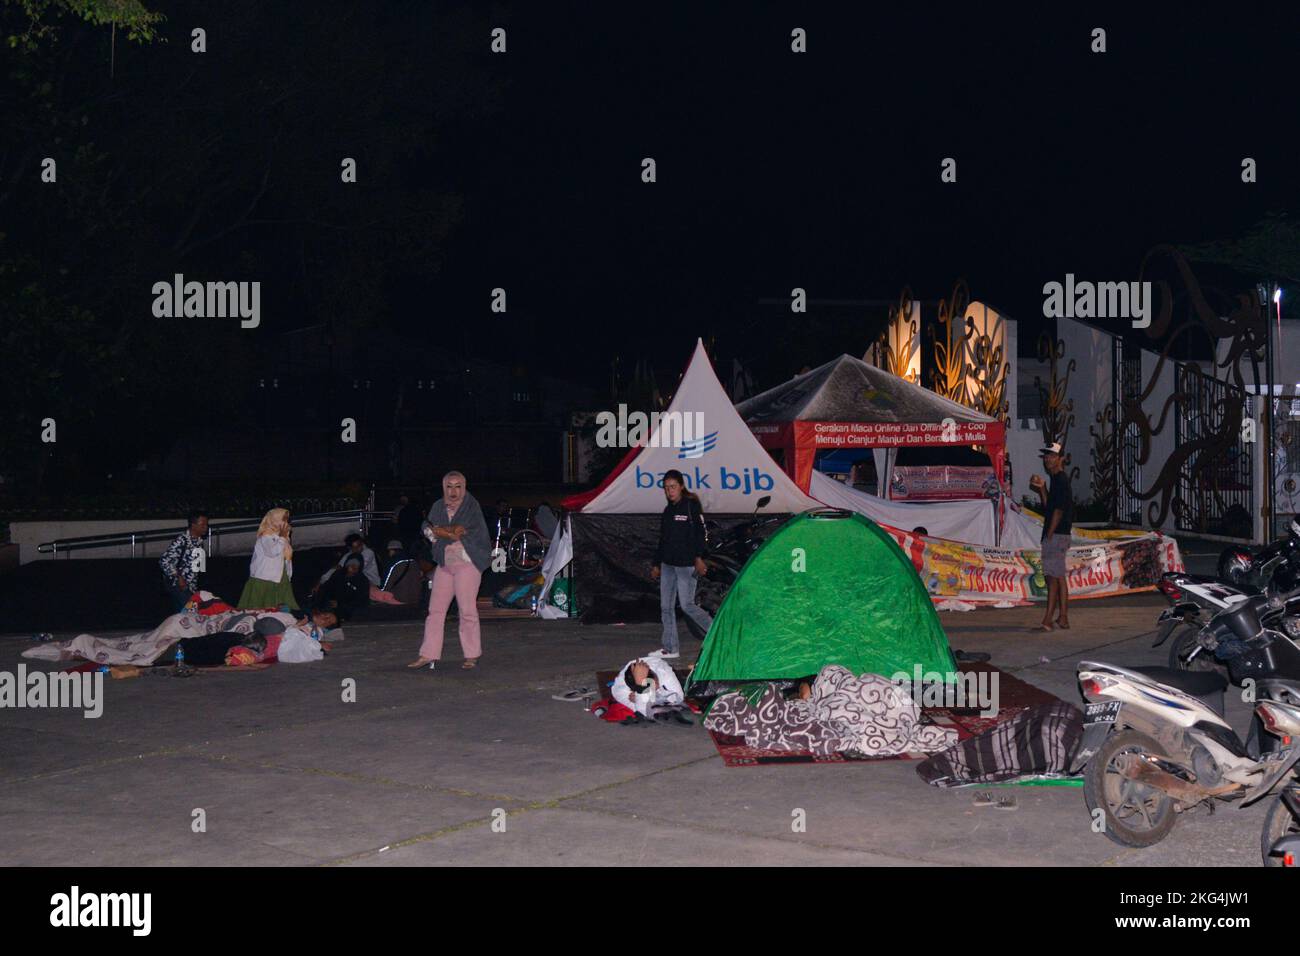 Cianjur, Indonesia. 22nd Nov, 2022. People affected by the earthquake rest outdoors in Cianjur, West Java, Indonesia, on Nov. 22, 2022. A total of 162 people were killed after a 5.6-magnitude earthquake hit Indonesia's West Java province on Monday, officials said. Credit: Xu Qin/Xinhua/Alamy Live News Stock Photo